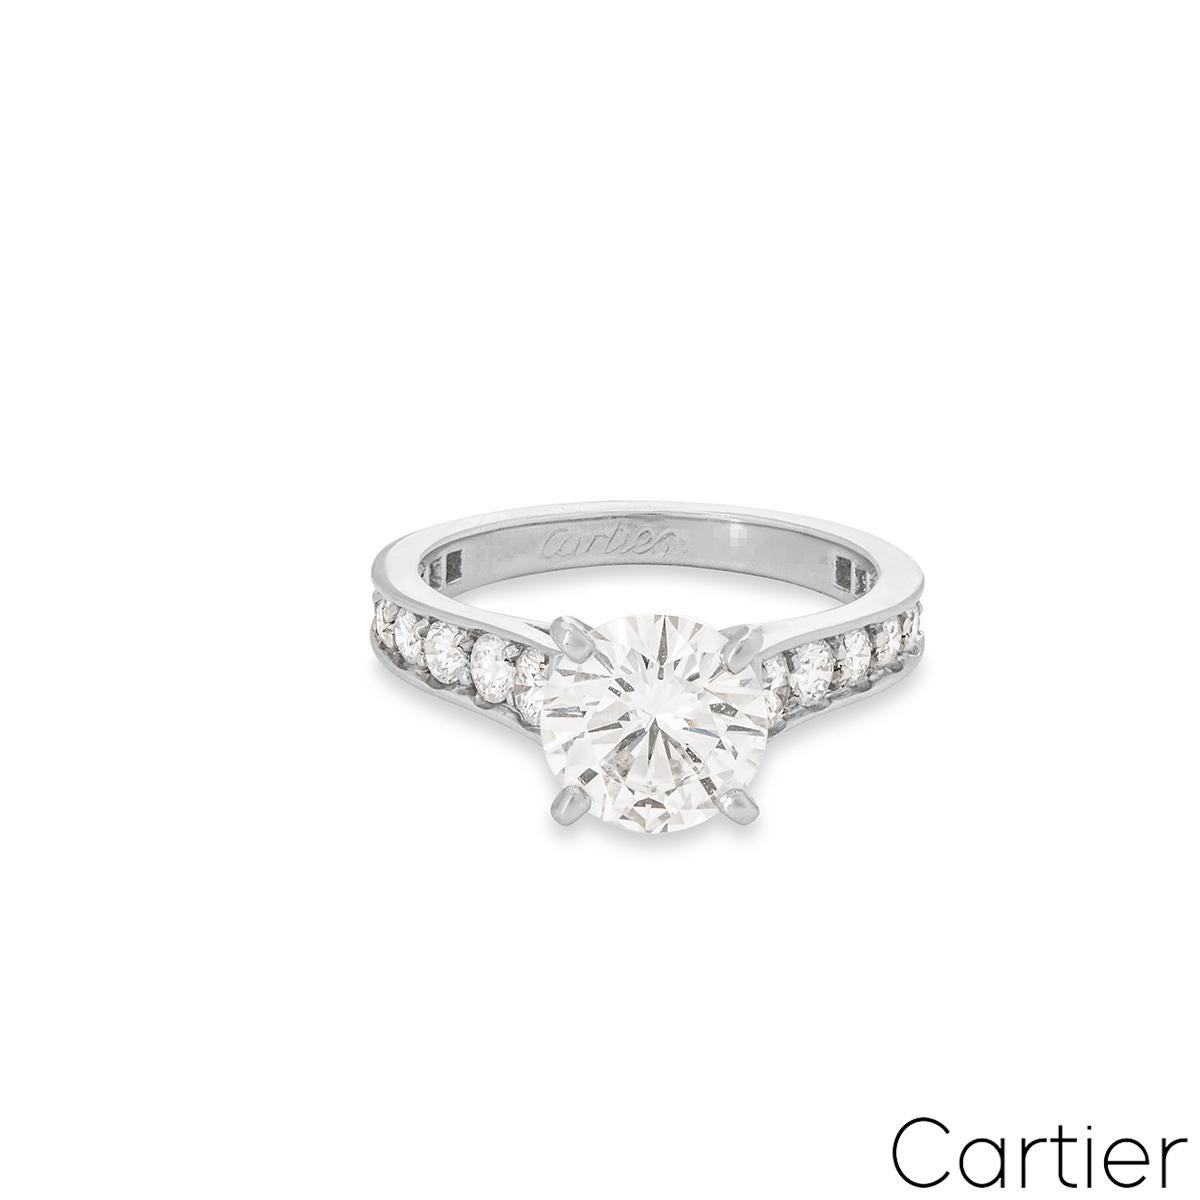 Cartier Solitaire 1895 Diamond Ring 1.70ct G/VVS1 GIA Certified  In Excellent Condition For Sale In London, GB